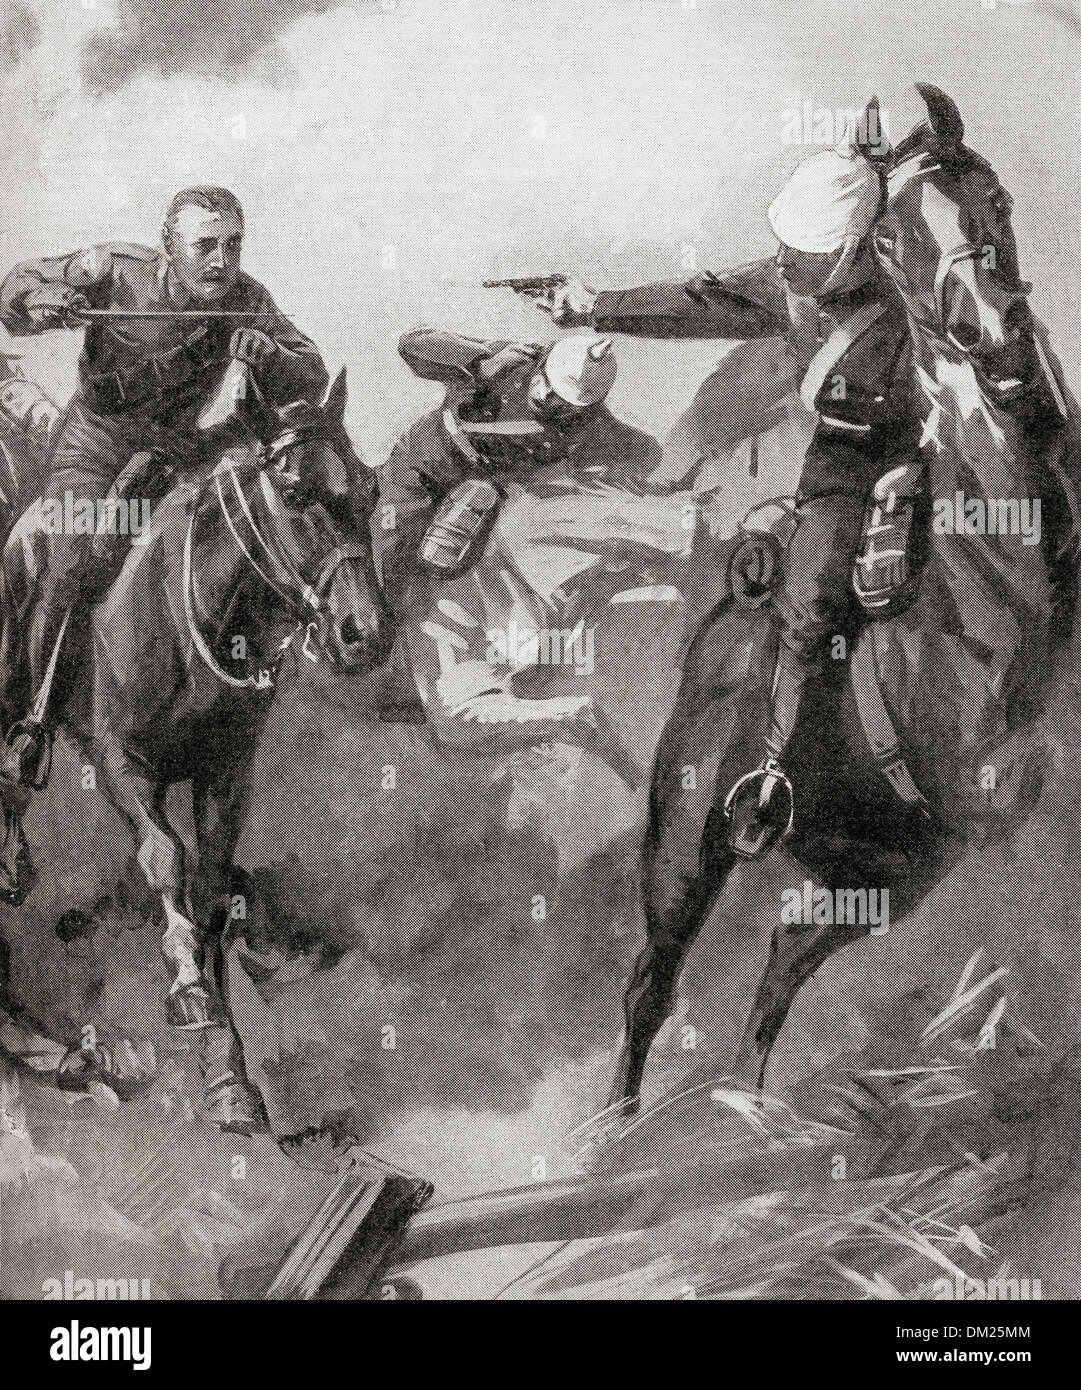 Furious charge of British cavalry at The Battle of Mons, 23rd August 1914 during WWI. Stock Photo